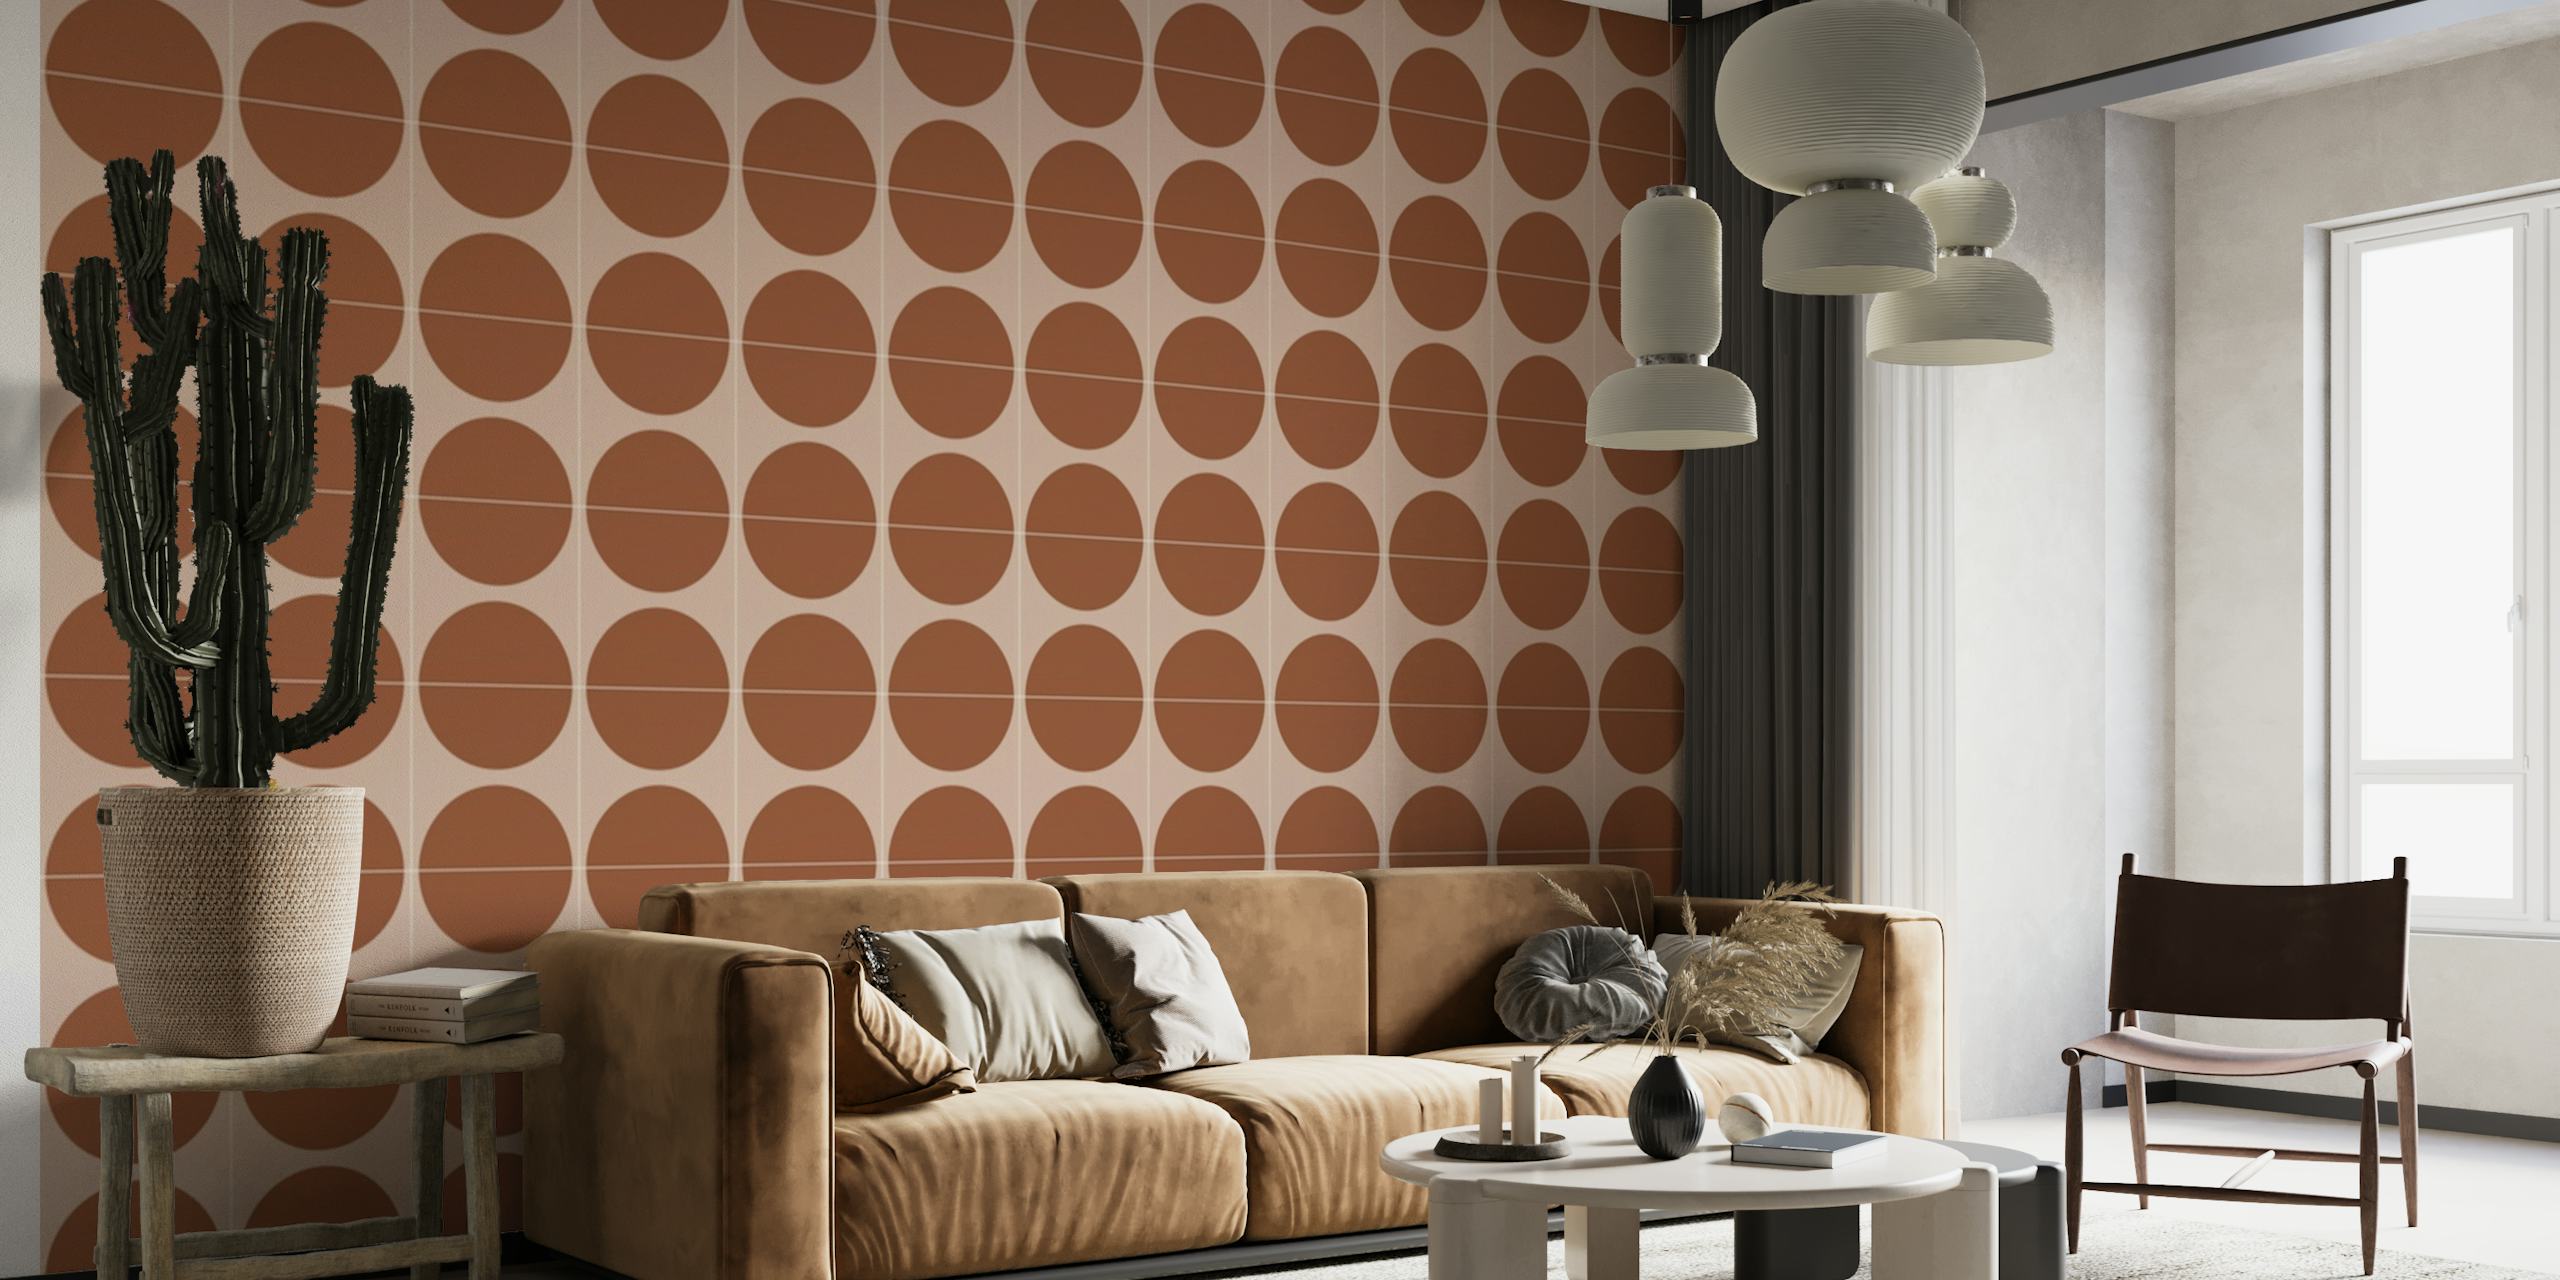 Painted Cotto Tiles Cinnamon tapete